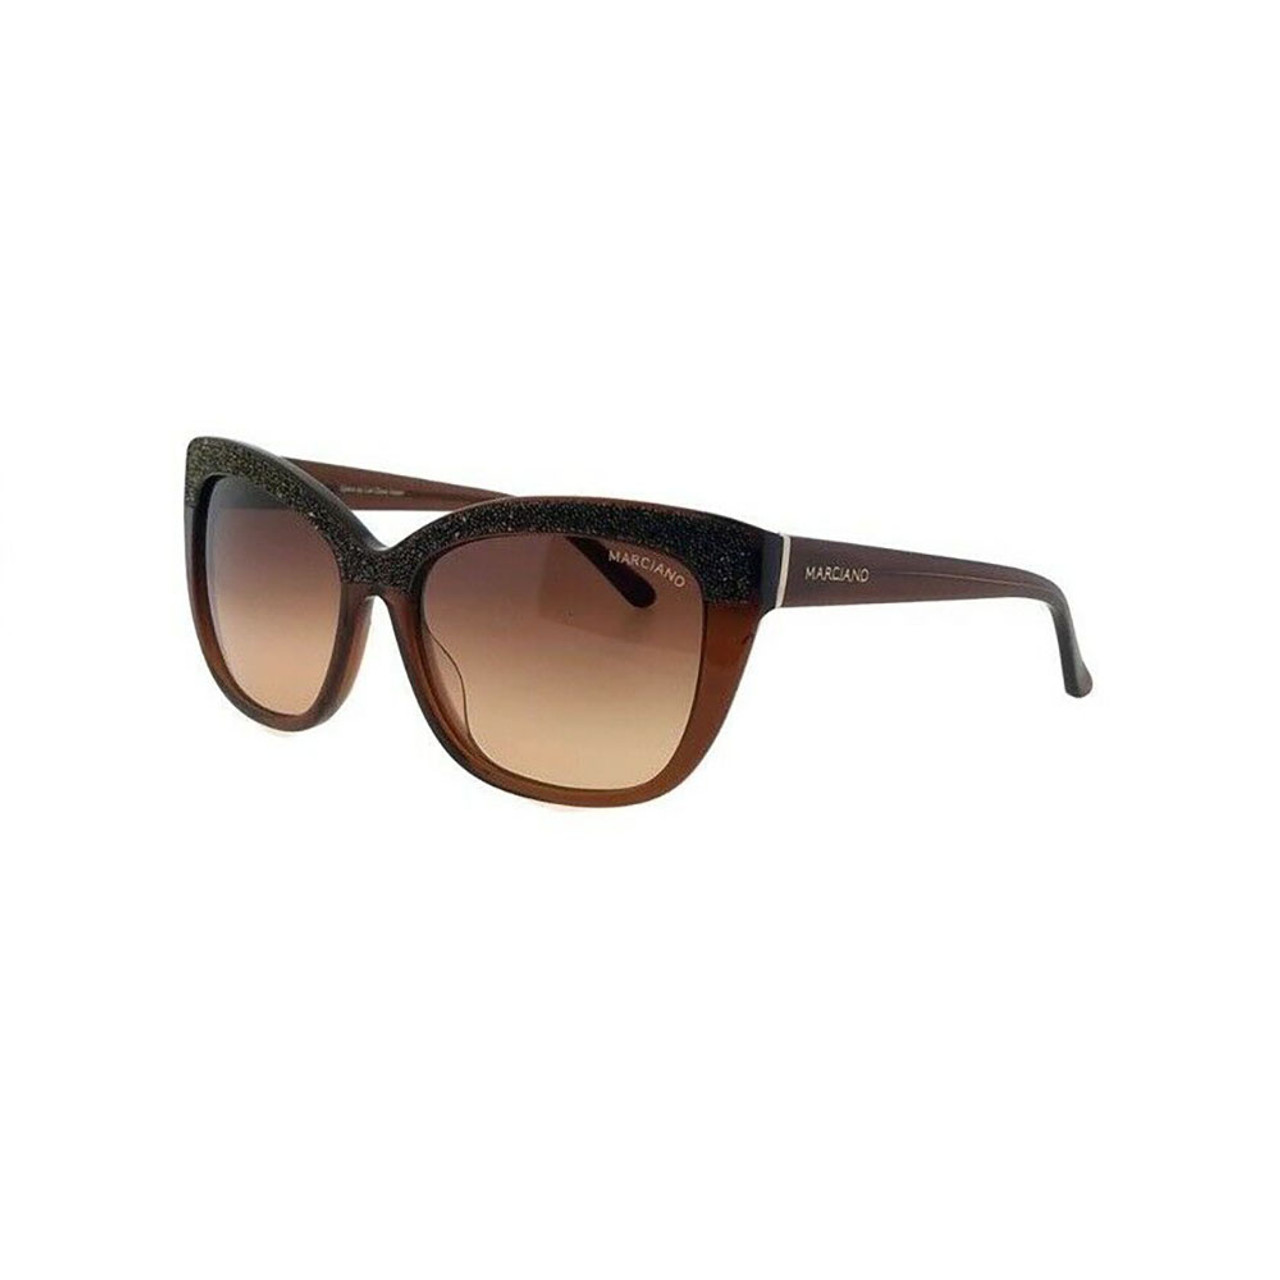 Guess® by Marciano Women's Sunglasses product image